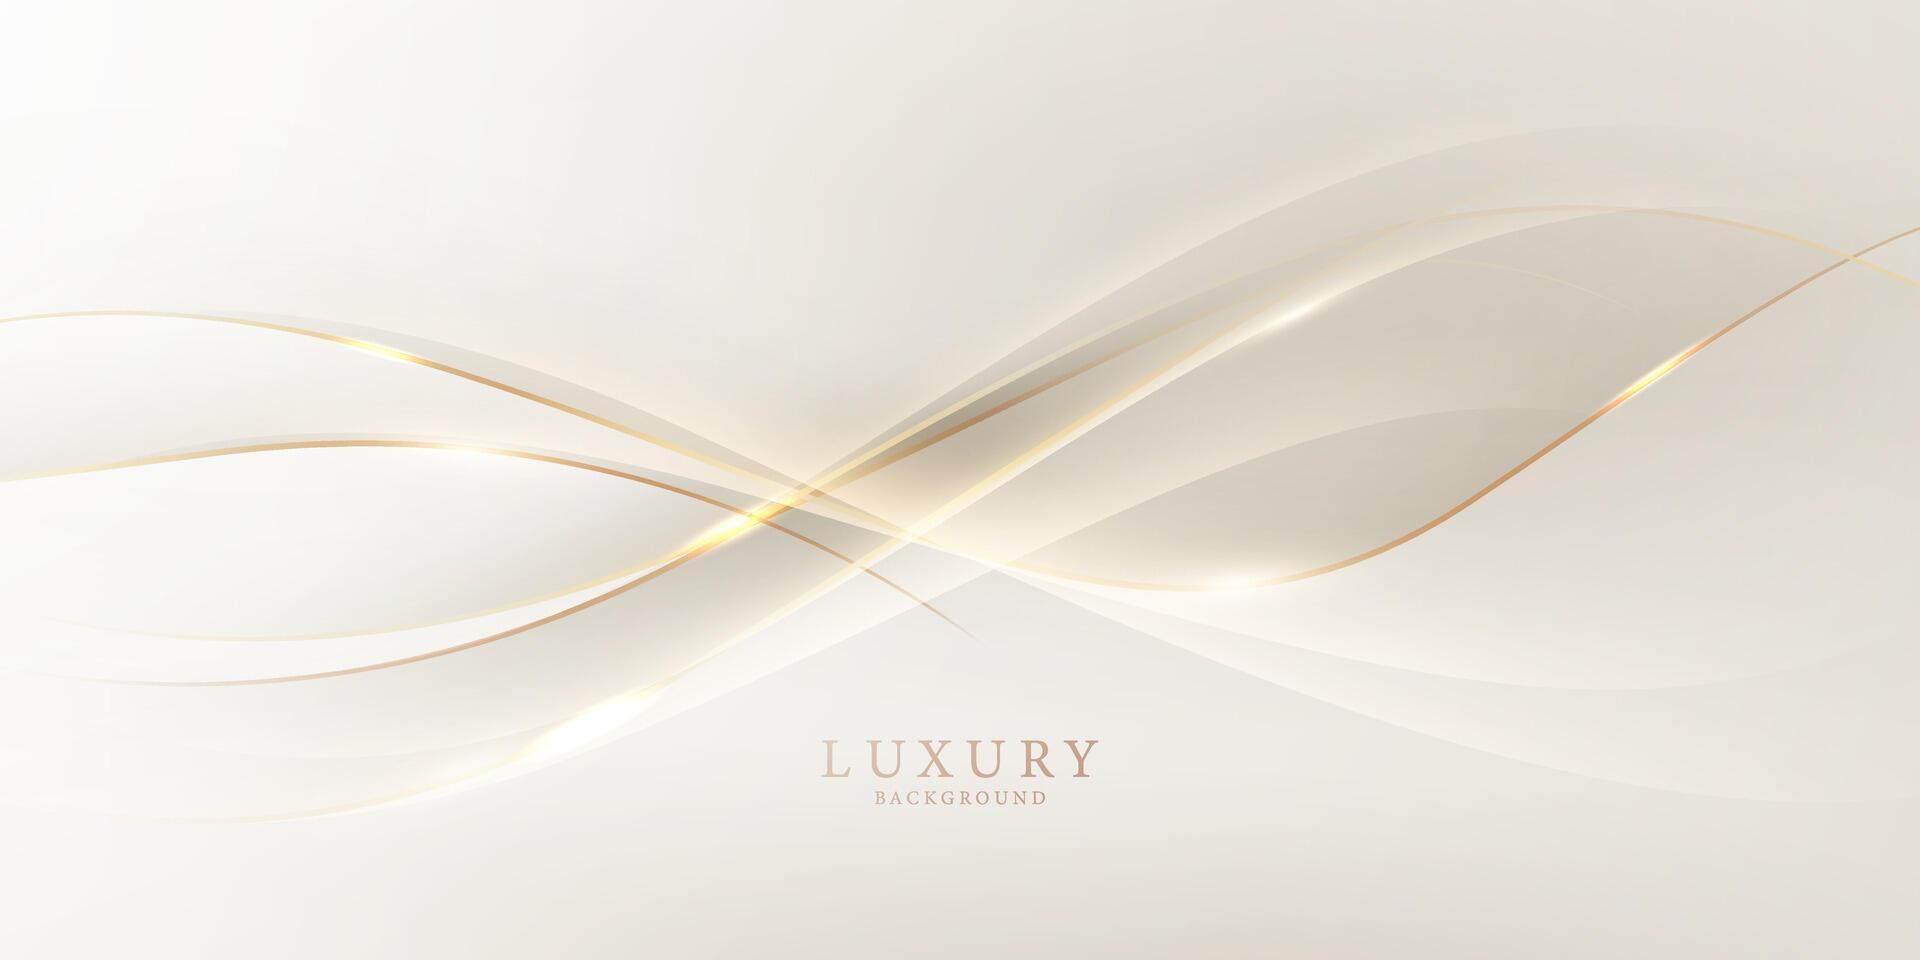 golden abstract background with luxury illustration vector